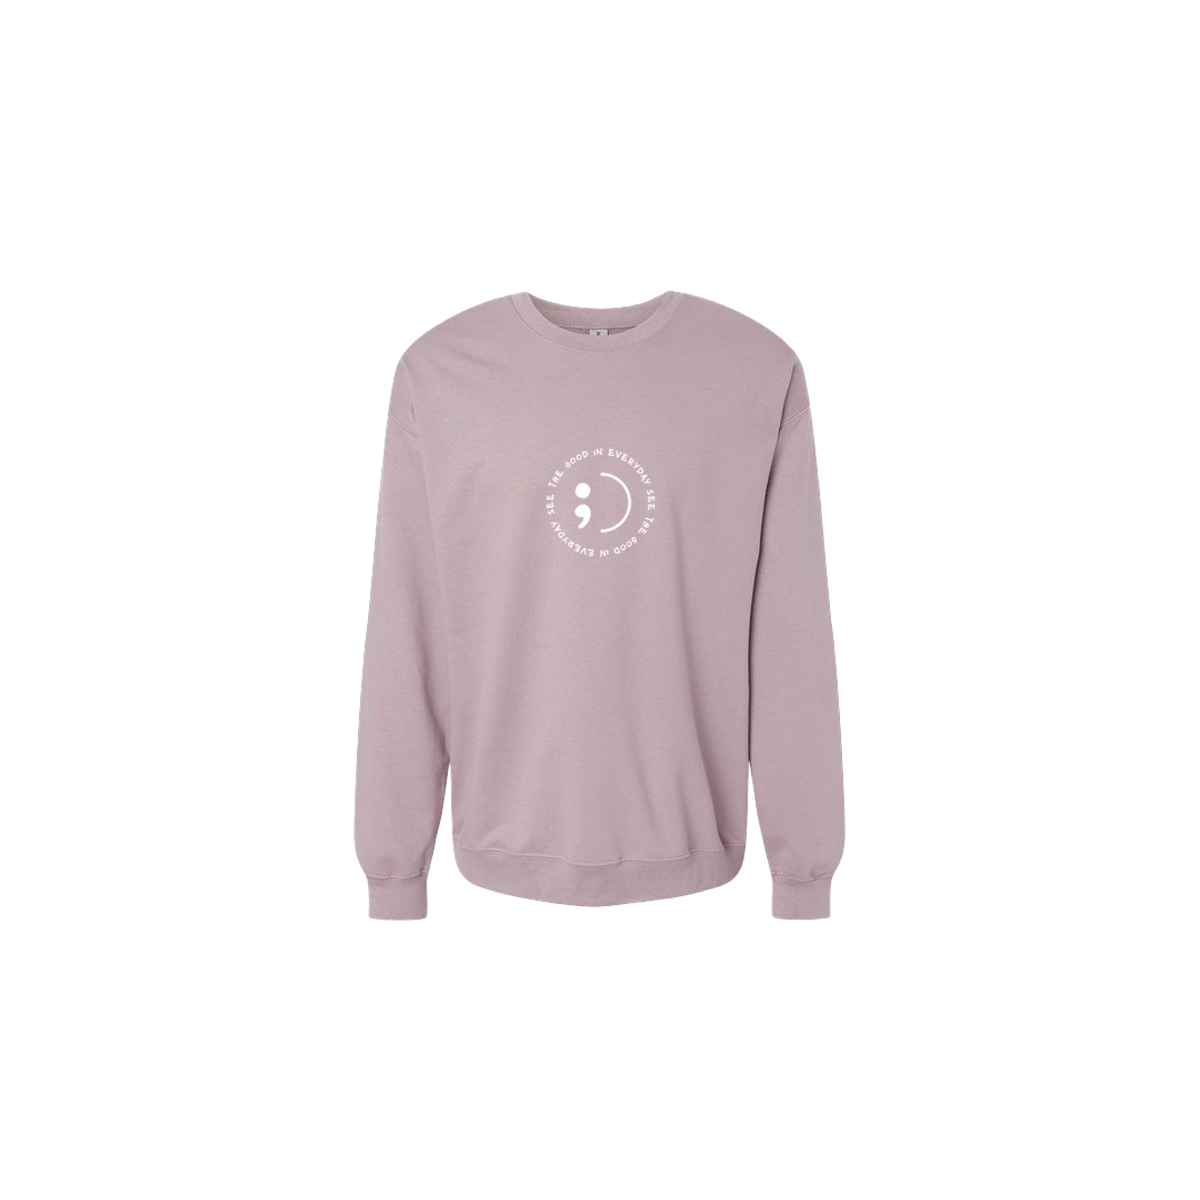 See the Good in Everyday Embroidered Mauve Crewneck - Mental Health Awareness Clothing